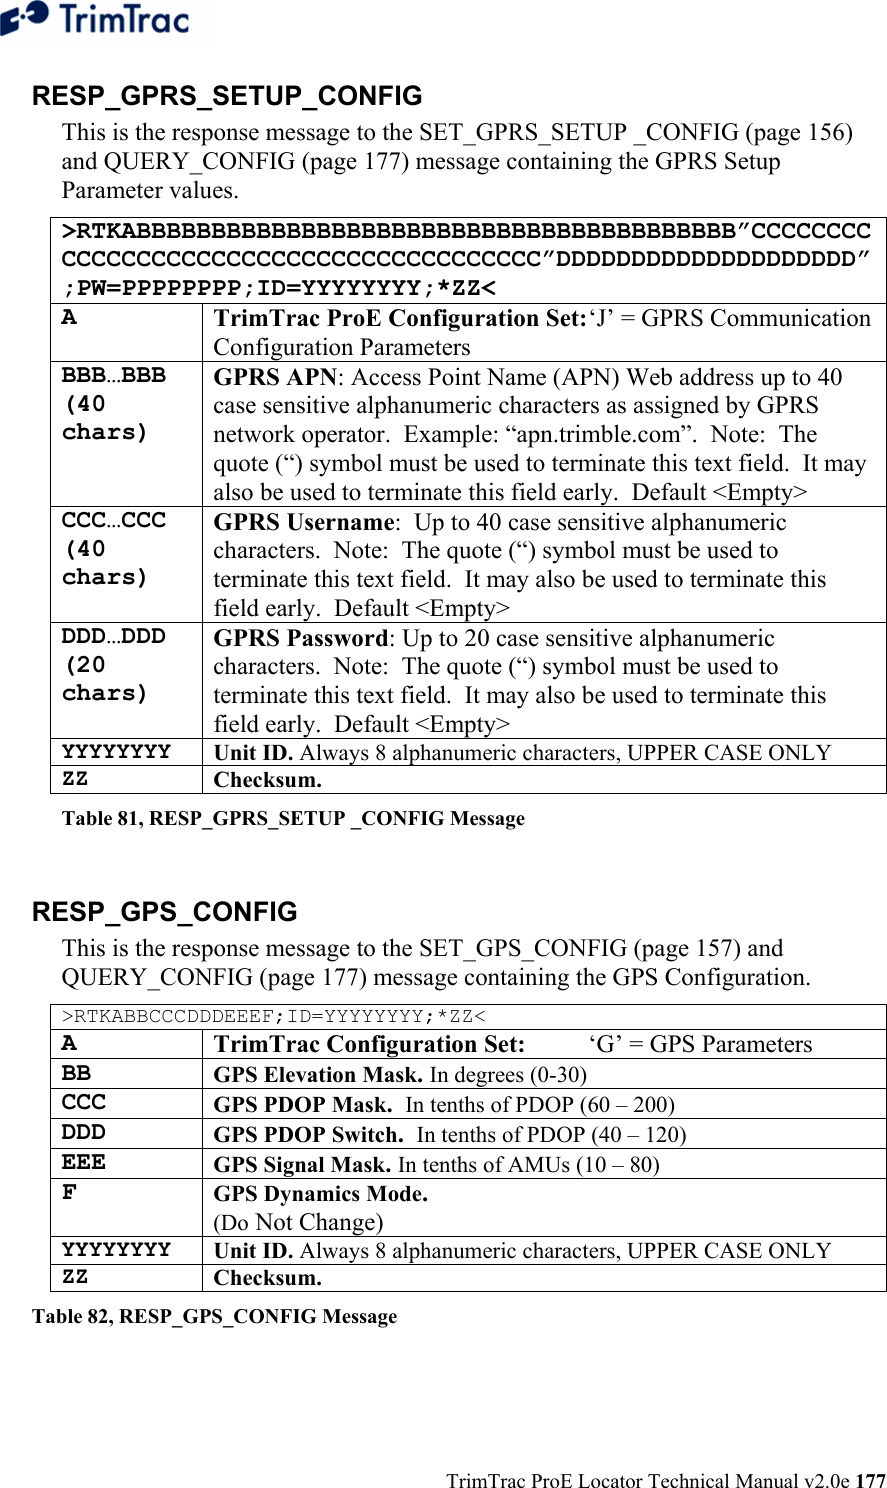  TrimTrac ProE Locator Technical Manual v2.0e 177 RESP_GPRS_SETUP_CONFIG  This is the response message to the SET_GPRS_SETUP _CONFIG (page 156) and QUERY_CONFIG (page 177) message containing the GPRS Setup Parameter values. &gt;RTKABBBBBBBBBBBBBBBBBBBBBBBBBBBBBBBBBBBBBBBB”CCCCCCCCCCCCCCCCCCCCCCCCCCCCCCCCCCCCCCCC”DDDDDDDDDDDDDDDDDDDD”;PW=PPPPPPPP;ID=YYYYYYYY;*ZZ&lt; A  TrimTrac ProE Configuration Set: ‘J’ = GPRS Communication Configuration Parameters BBB…BBB (40 chars) GPRS APN: Access Point Name (APN) Web address up to 40 case sensitive alphanumeric characters as assigned by GPRS network operator.  Example: “apn.trimble.com”.  Note:  The quote (“) symbol must be used to terminate this text field.  It may also be used to terminate this field early.  Default &lt;Empty&gt; CCC…CCC (40 chars) GPRS Username:  Up to 40 case sensitive alphanumeric characters.  Note:  The quote (“) symbol must be used to terminate this text field.  It may also be used to terminate this field early.  Default &lt;Empty&gt; DDD…DDD (20 chars) GPRS Password: Up to 20 case sensitive alphanumeric characters.  Note:  The quote (“) symbol must be used to terminate this text field.  It may also be used to terminate this field early.  Default &lt;Empty&gt; YYYYYYYY Unit ID. Always 8 alphanumeric characters, UPPER CASE ONLY ZZ Checksum.   Table 81, RESP_GPRS_SETUP _CONFIG Message   RESP_GPS_CONFIG This is the response message to the SET_GPS_CONFIG (page 157) and QUERY_CONFIG (page 177) message containing the GPS Configuration. &gt;RTKABBCCCDDDEEEF;ID=YYYYYYYY;*ZZ&lt; A  TrimTrac Configuration Set:  ‘G’ = GPS Parameters BB  GPS Elevation Mask. In degrees (0-30) CCC  GPS PDOP Mask.  In tenths of PDOP (60 – 200) DDD  GPS PDOP Switch.  In tenths of PDOP (40 – 120) EEE  GPS Signal Mask. In tenths of AMUs (10 – 80) F  GPS Dynamics Mode. (Do Not Change) YYYYYYYY Unit ID. Always 8 alphanumeric characters, UPPER CASE ONLY ZZ Checksum.   Table 82, RESP_GPS_CONFIG Message 